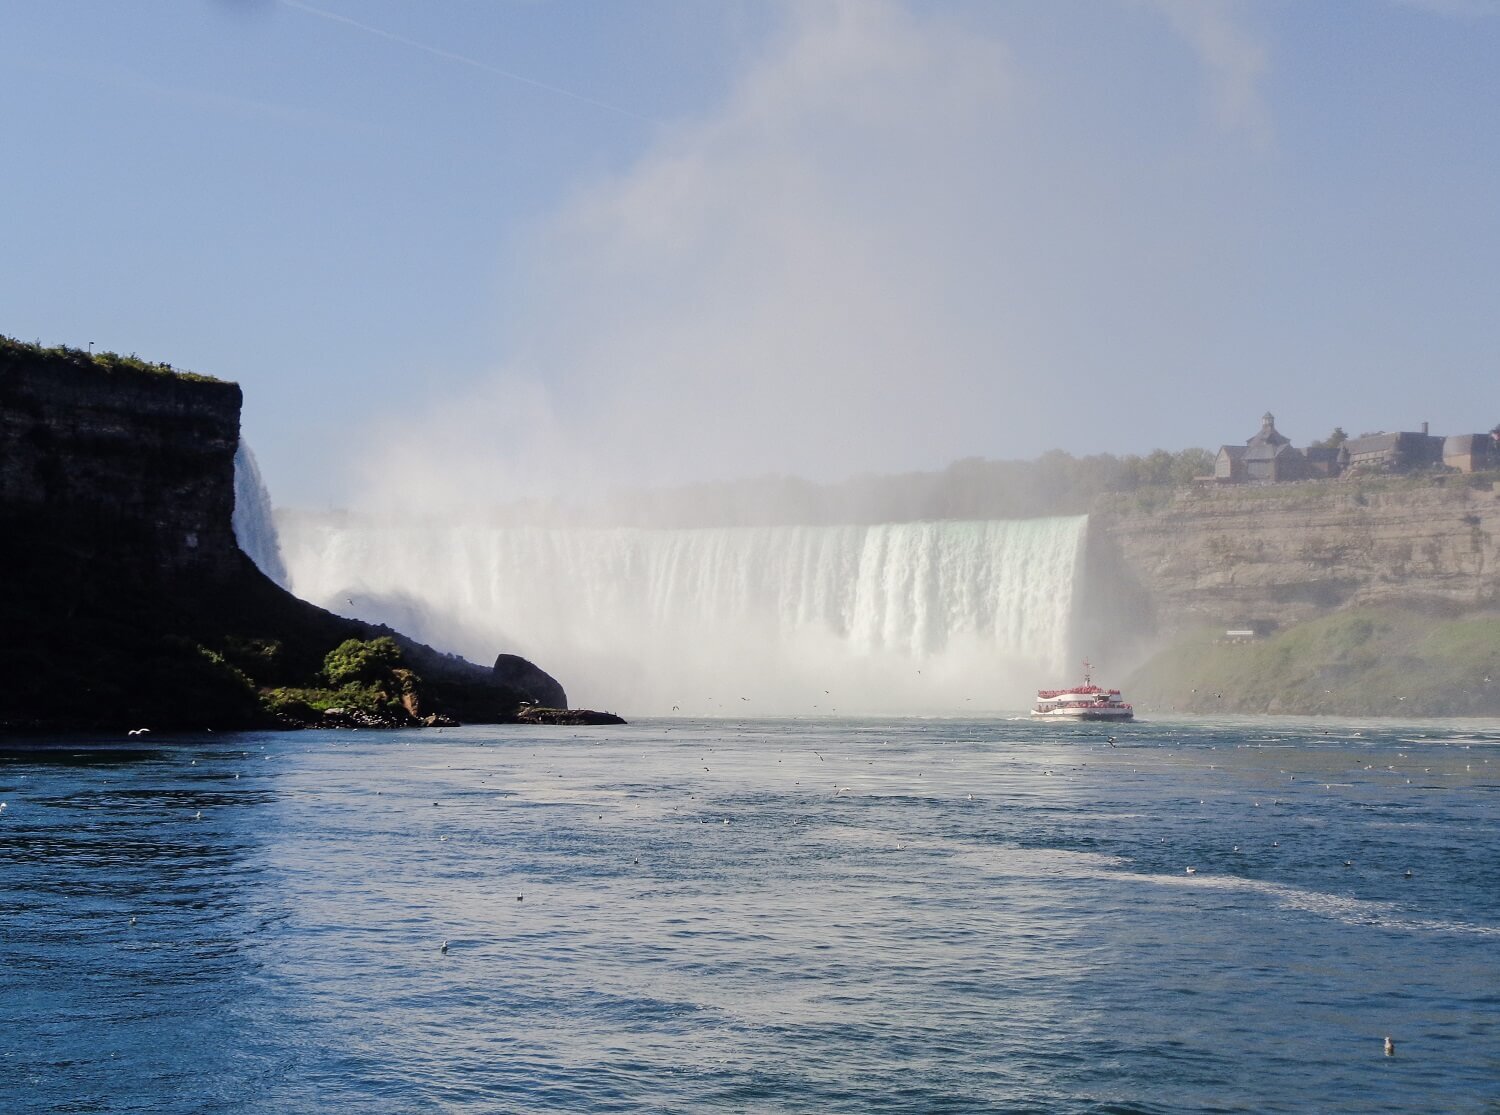 The world-famous Maid of the Mist